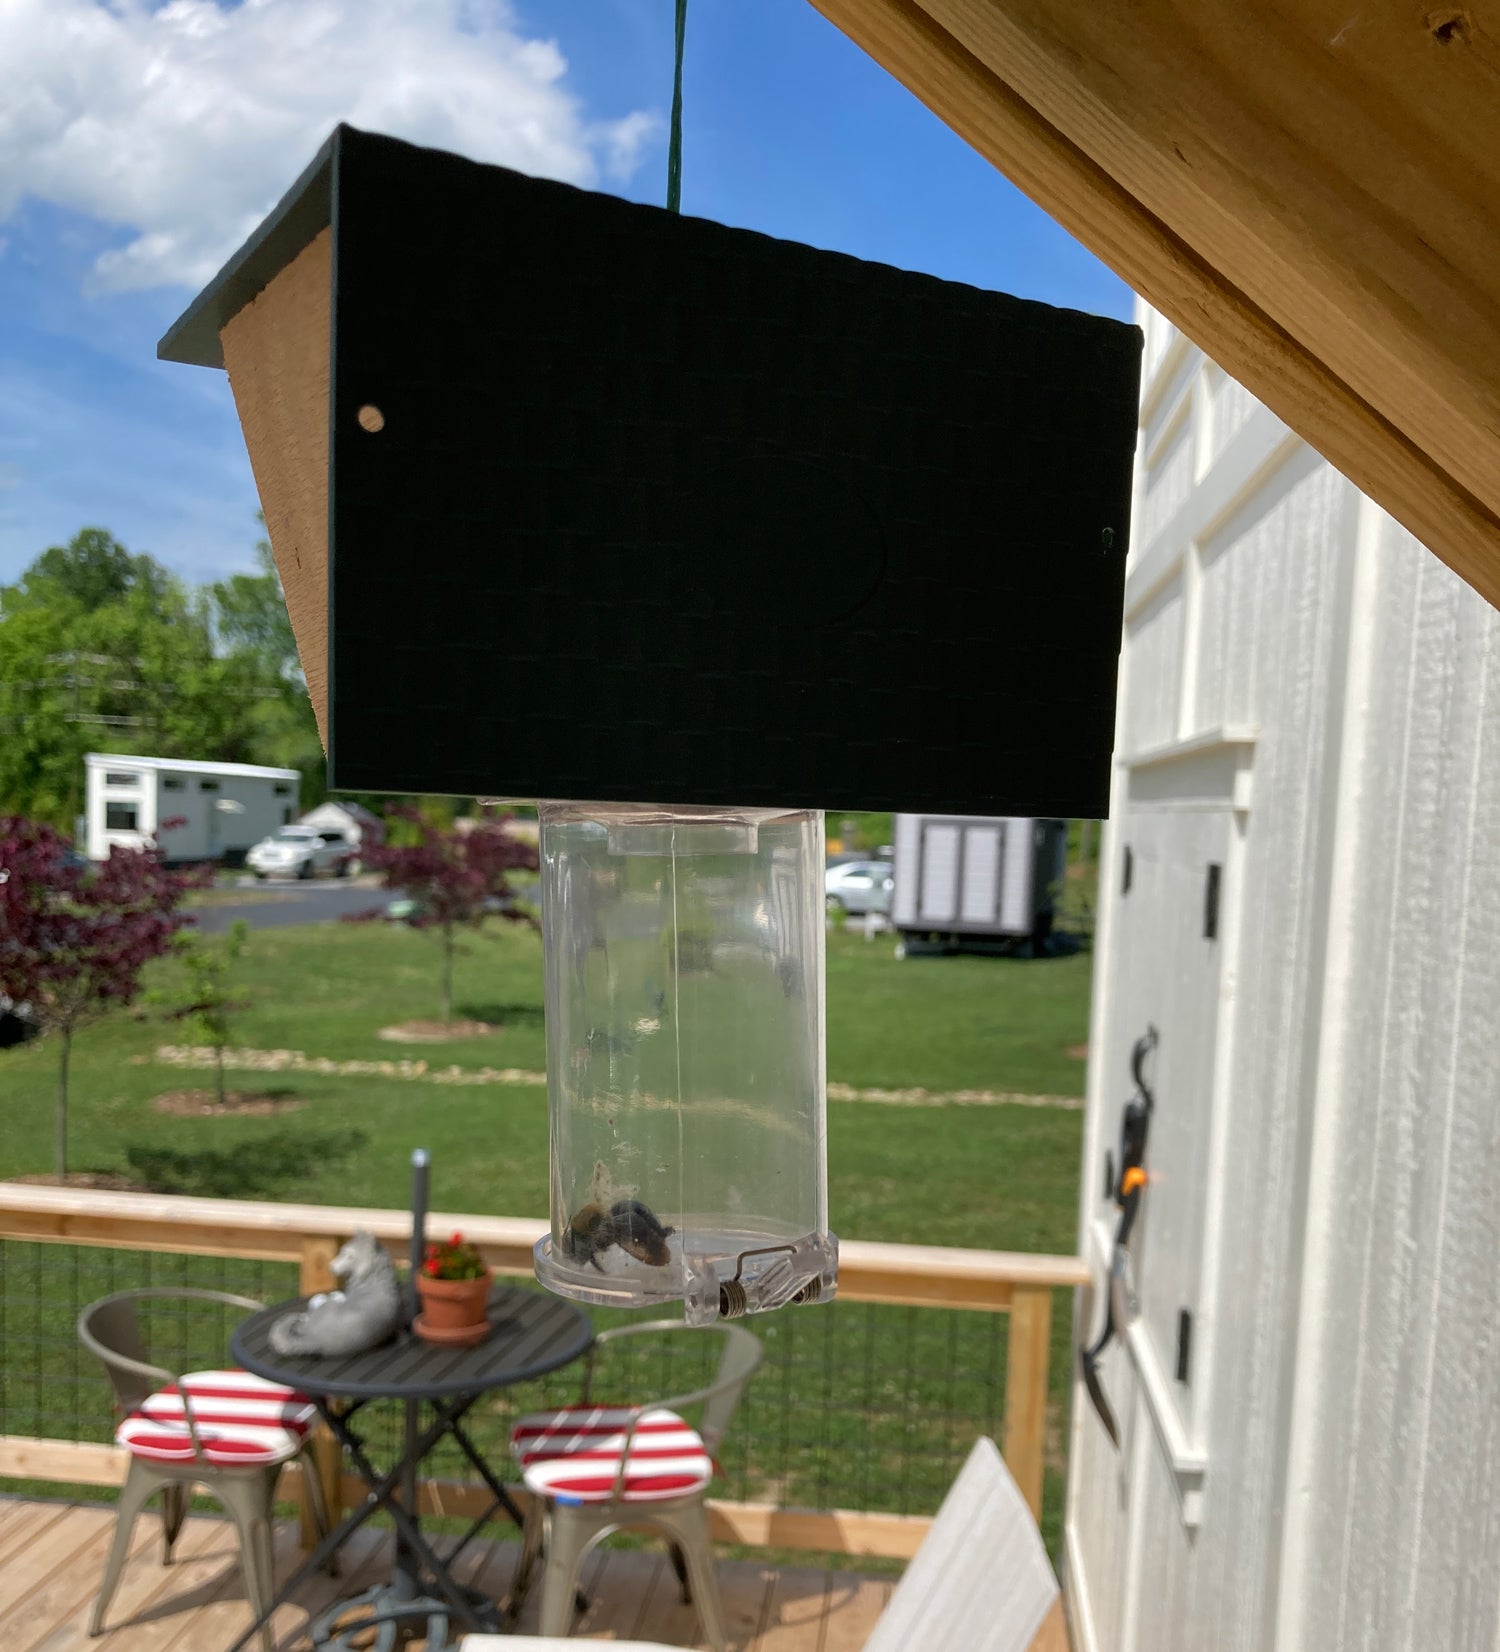 Enjoy your porch without carpenter bees!